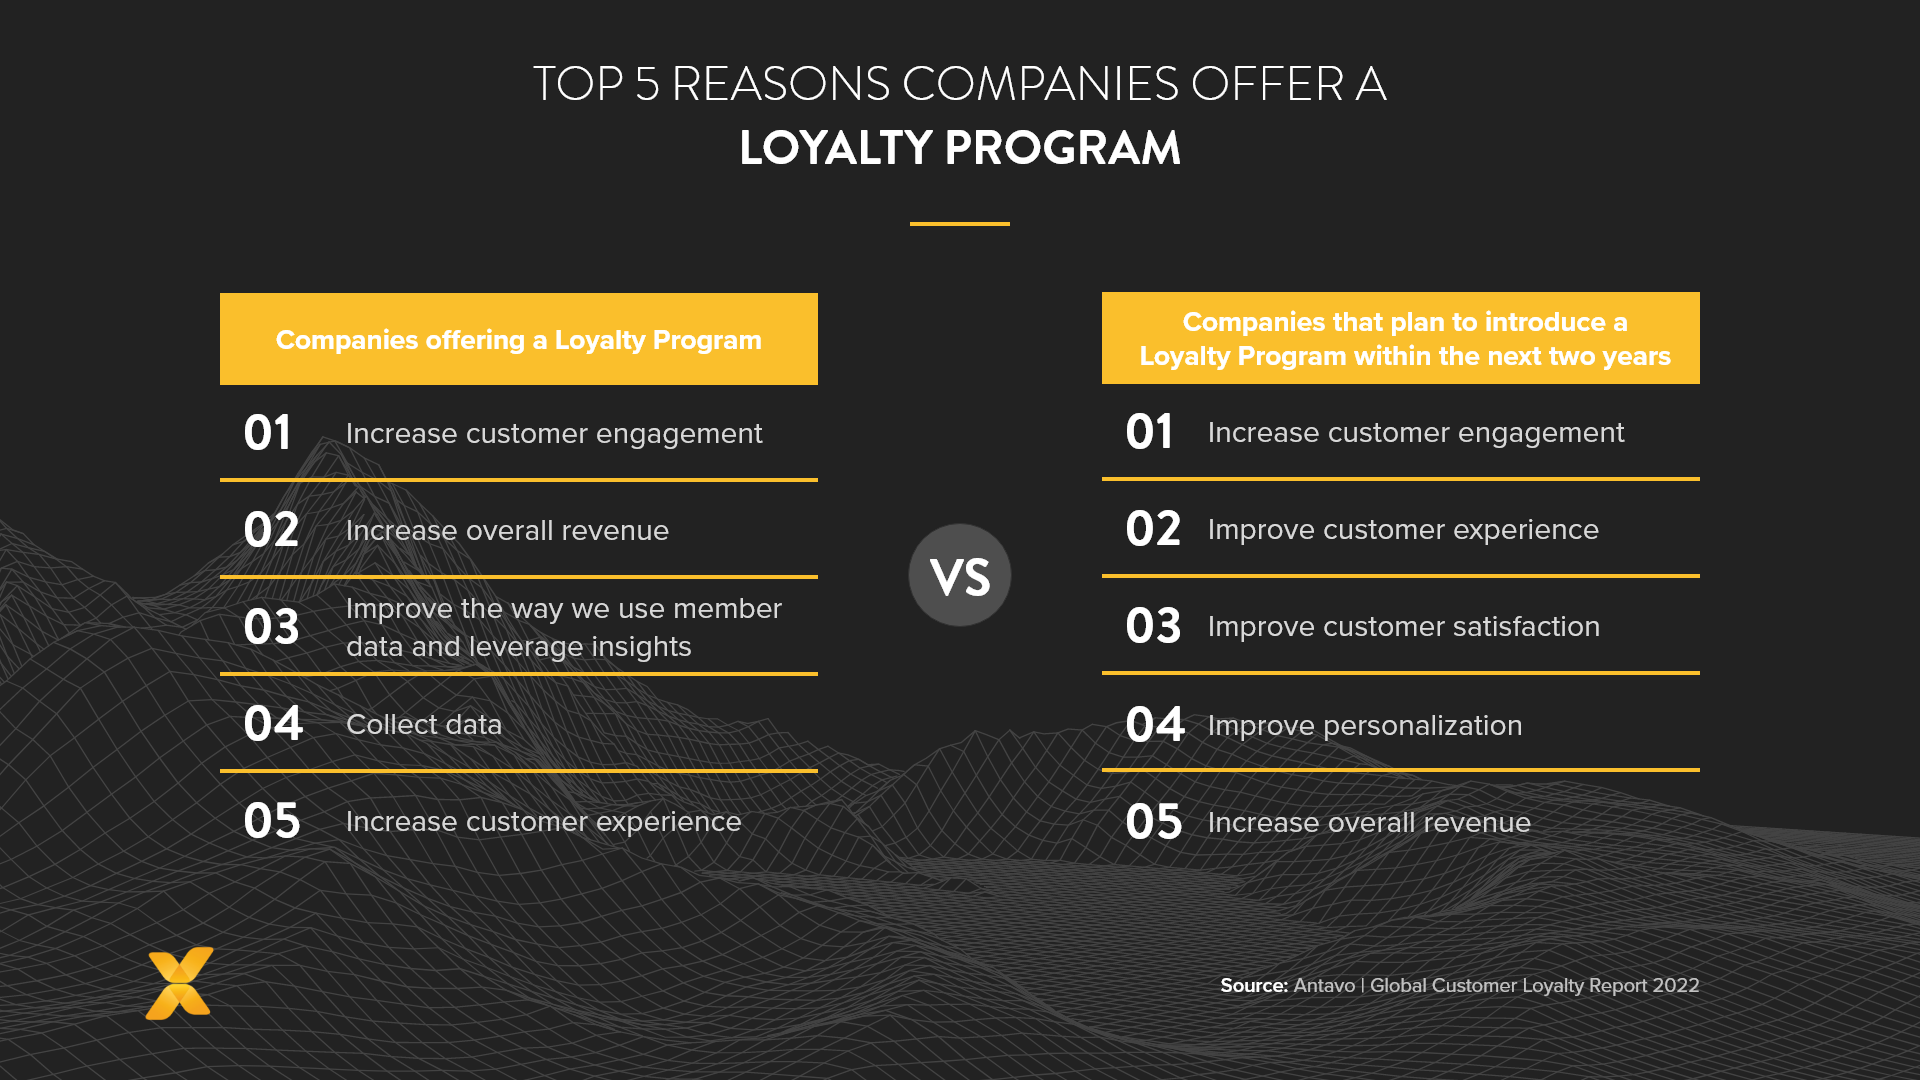 Top 5 reasons companies are offering or plan to offer an ecommerce loyalty program